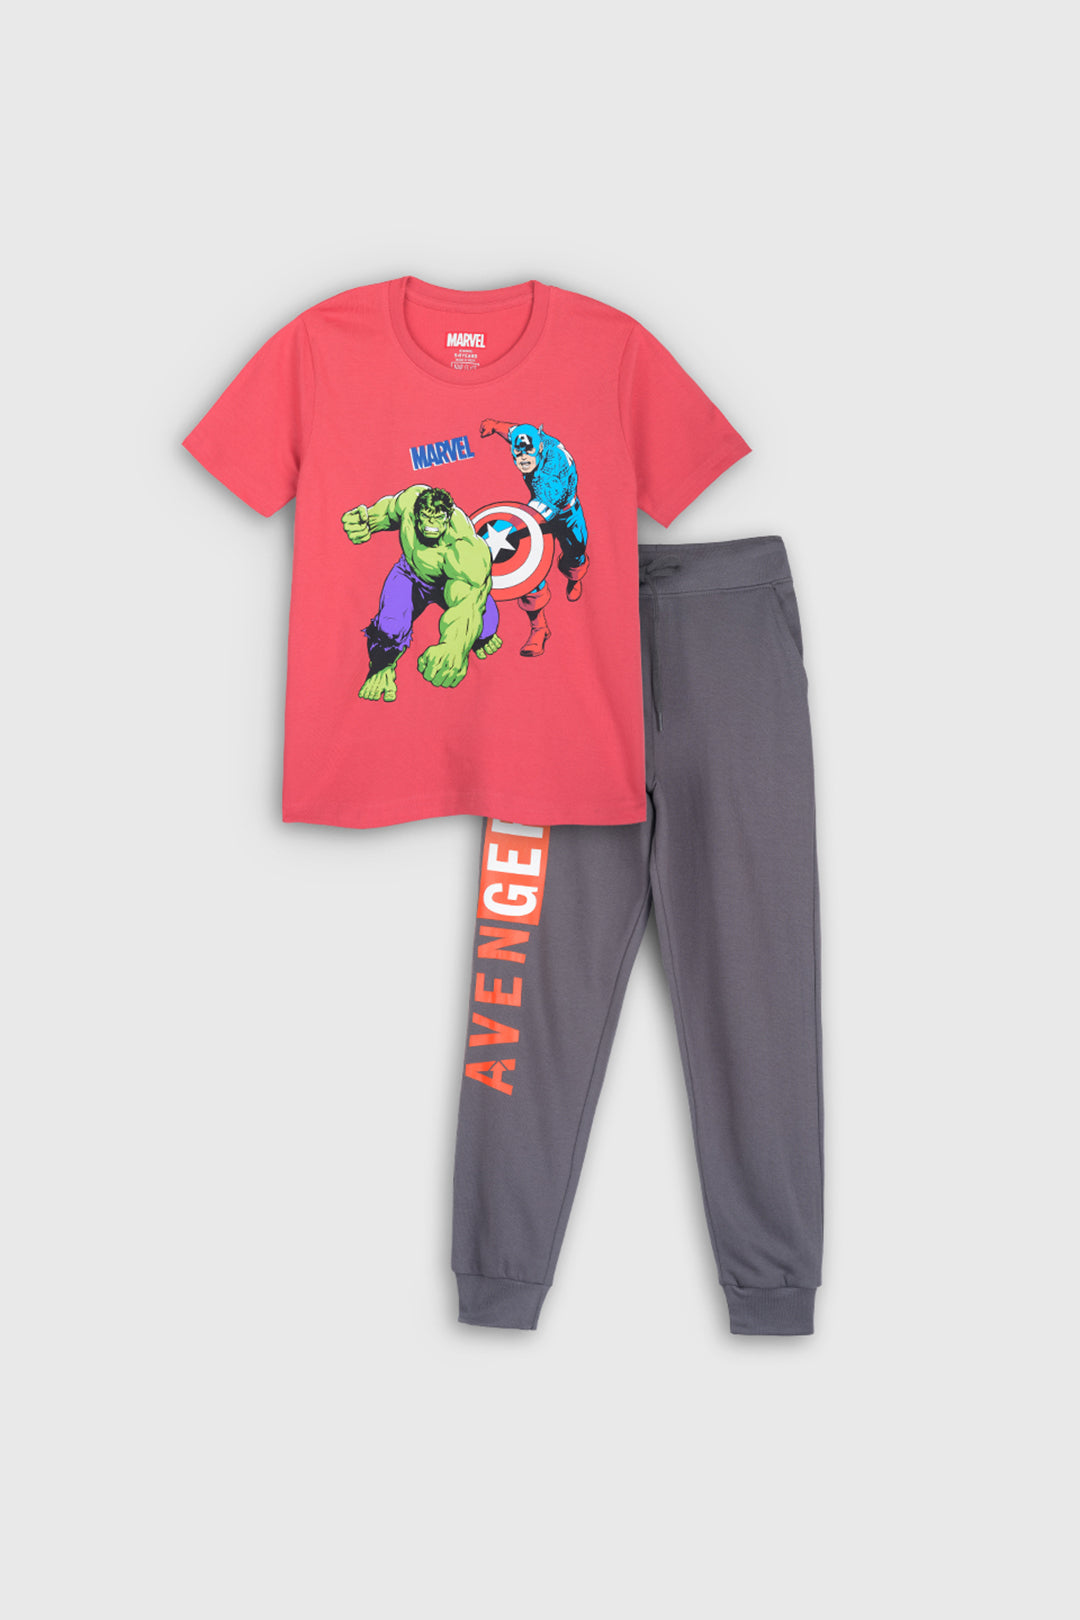 Marvel Red Tee and Jogger Set